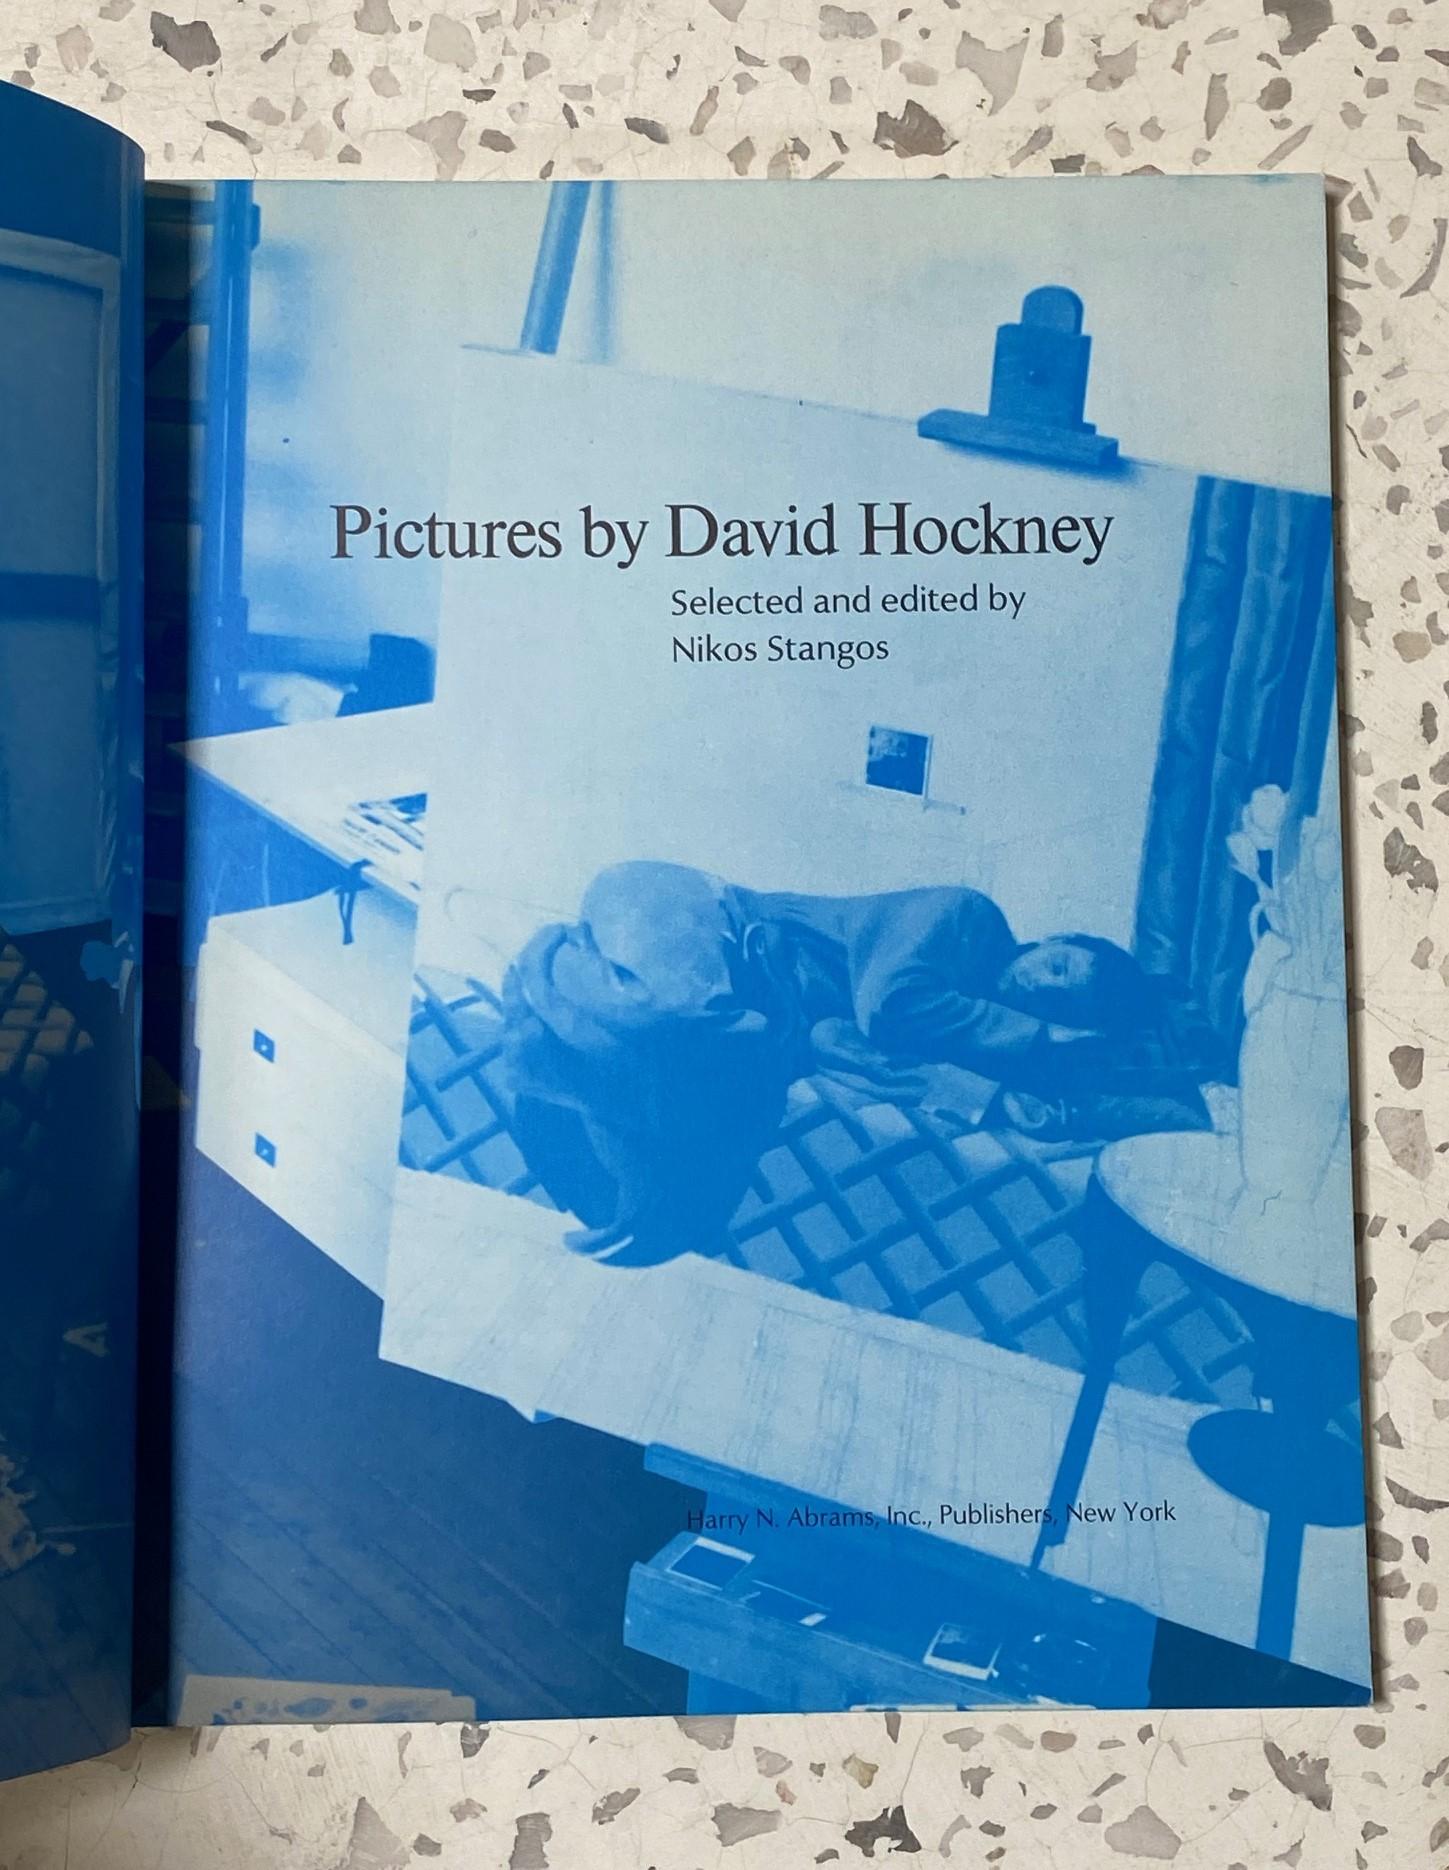 David Hockney Hand Signed First Edition Book Pictures by David Hockney, 1979 For Sale 4